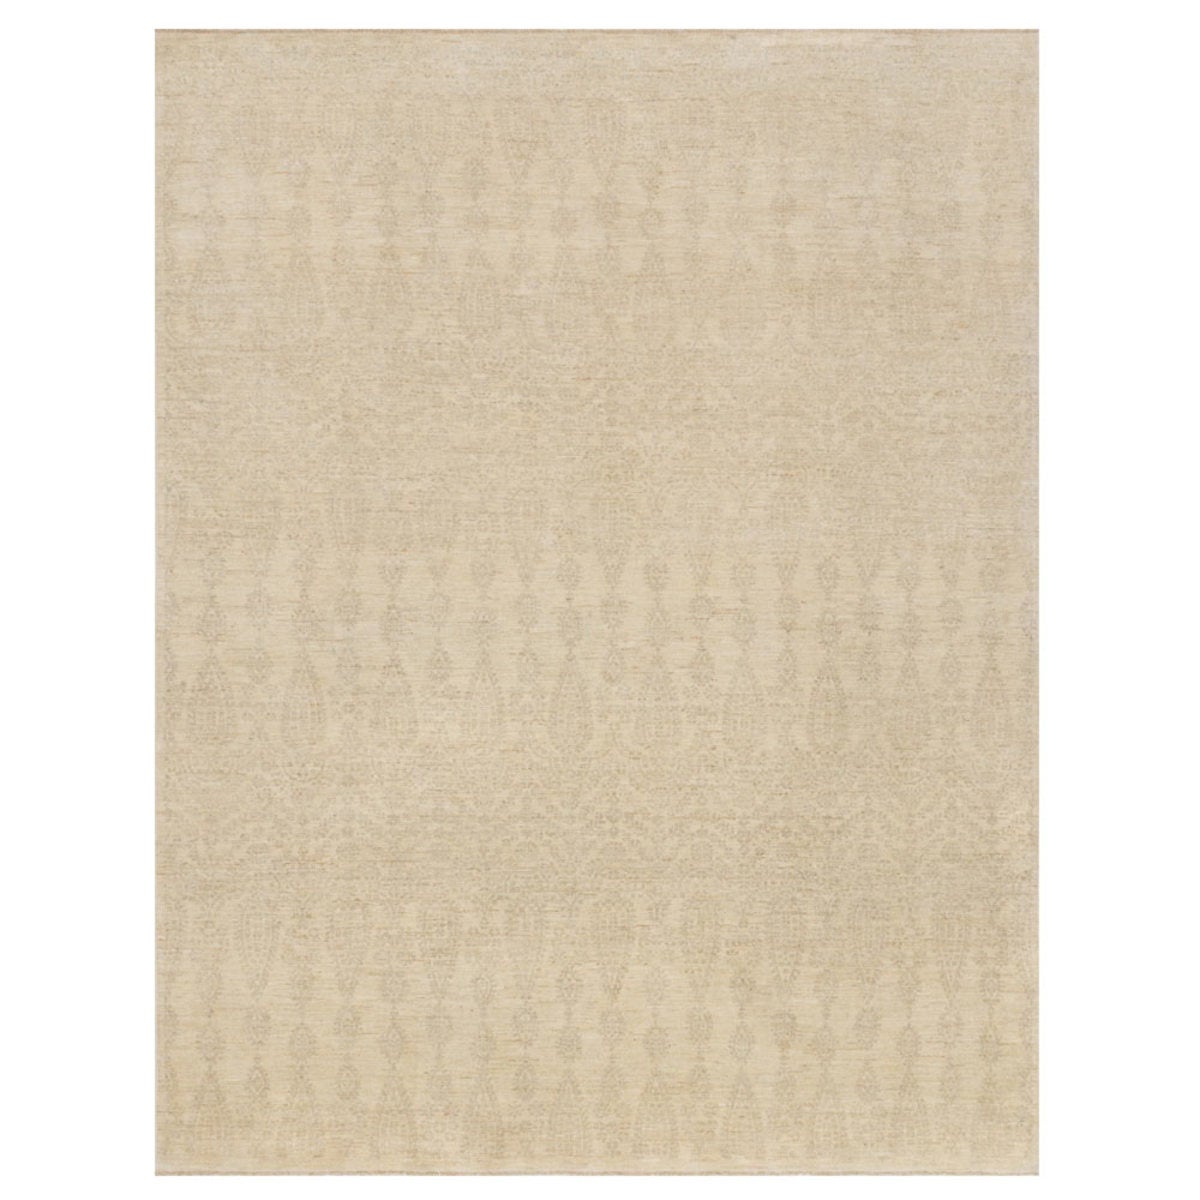 Loloi Essex Fading Arabesque Rug in Ivory - 7'9" x 9'9" - Ivory